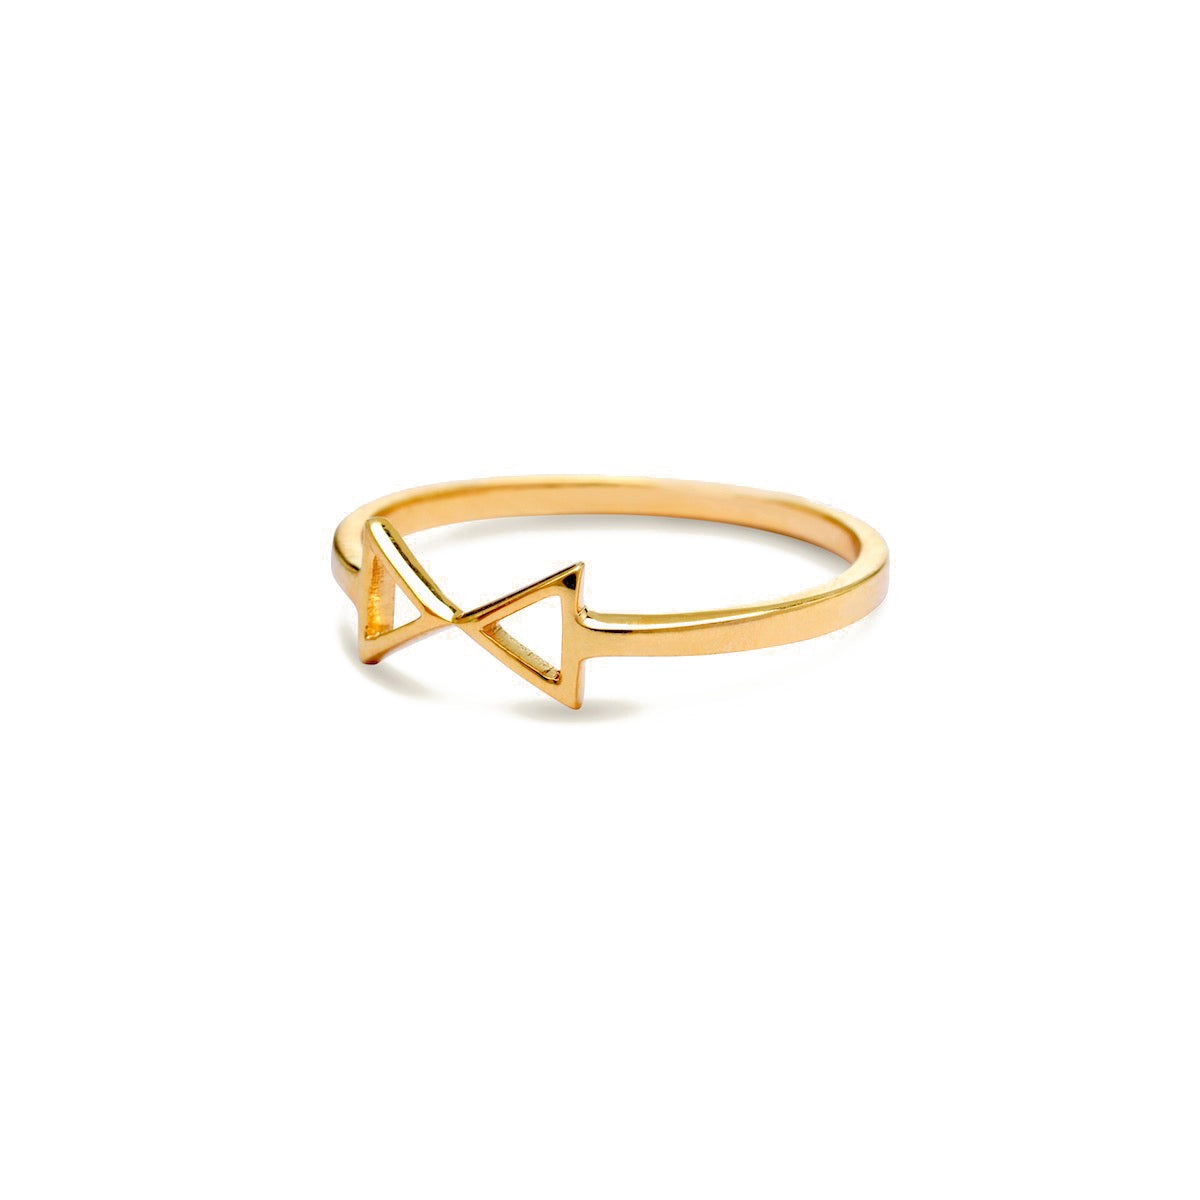 Amazon.com: 14K Minimalist Gold Ring - Dainty Solid Gold Wedding Band -  Minimalist Delicate Gold Ring Skinny Stacking Simple - Christmas Gift :  Handmade Products